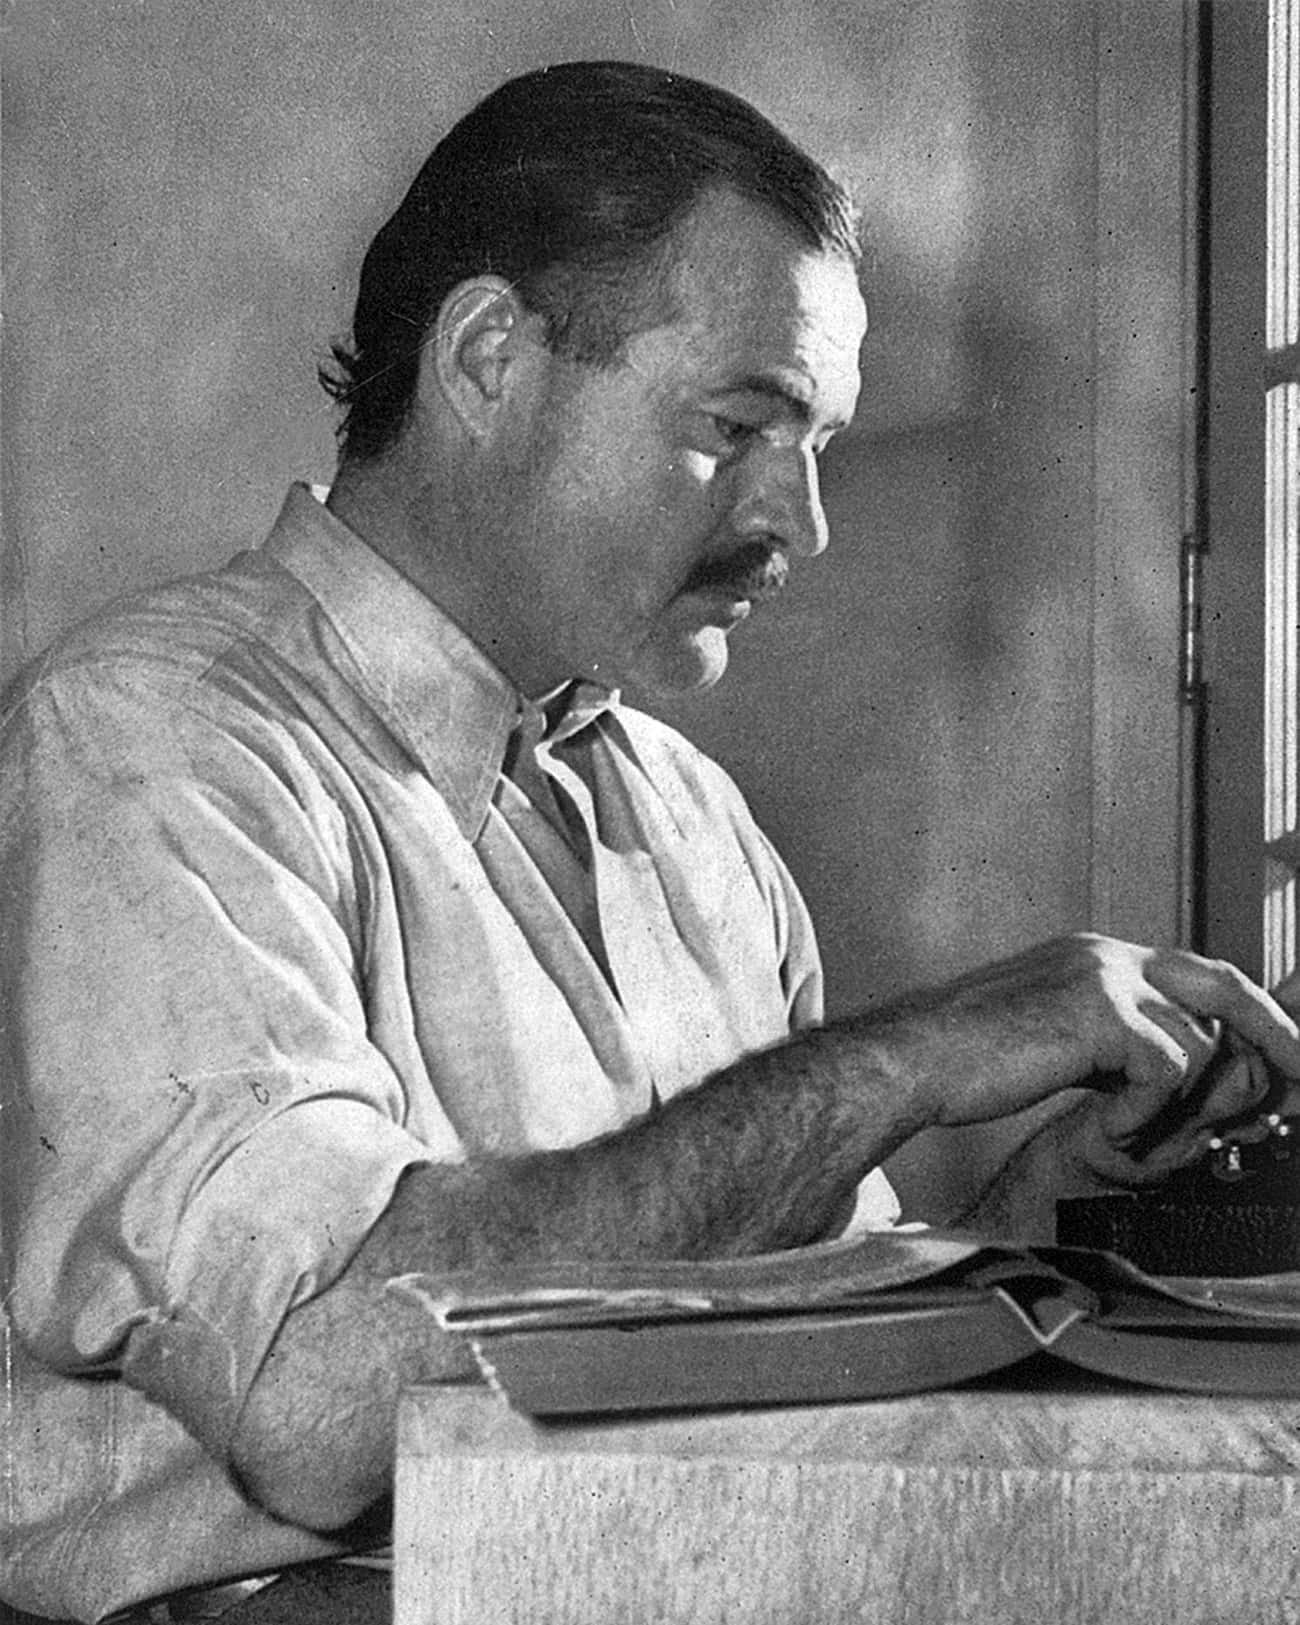 Ernest Hemingway Thought The FBI Was Spying On Him